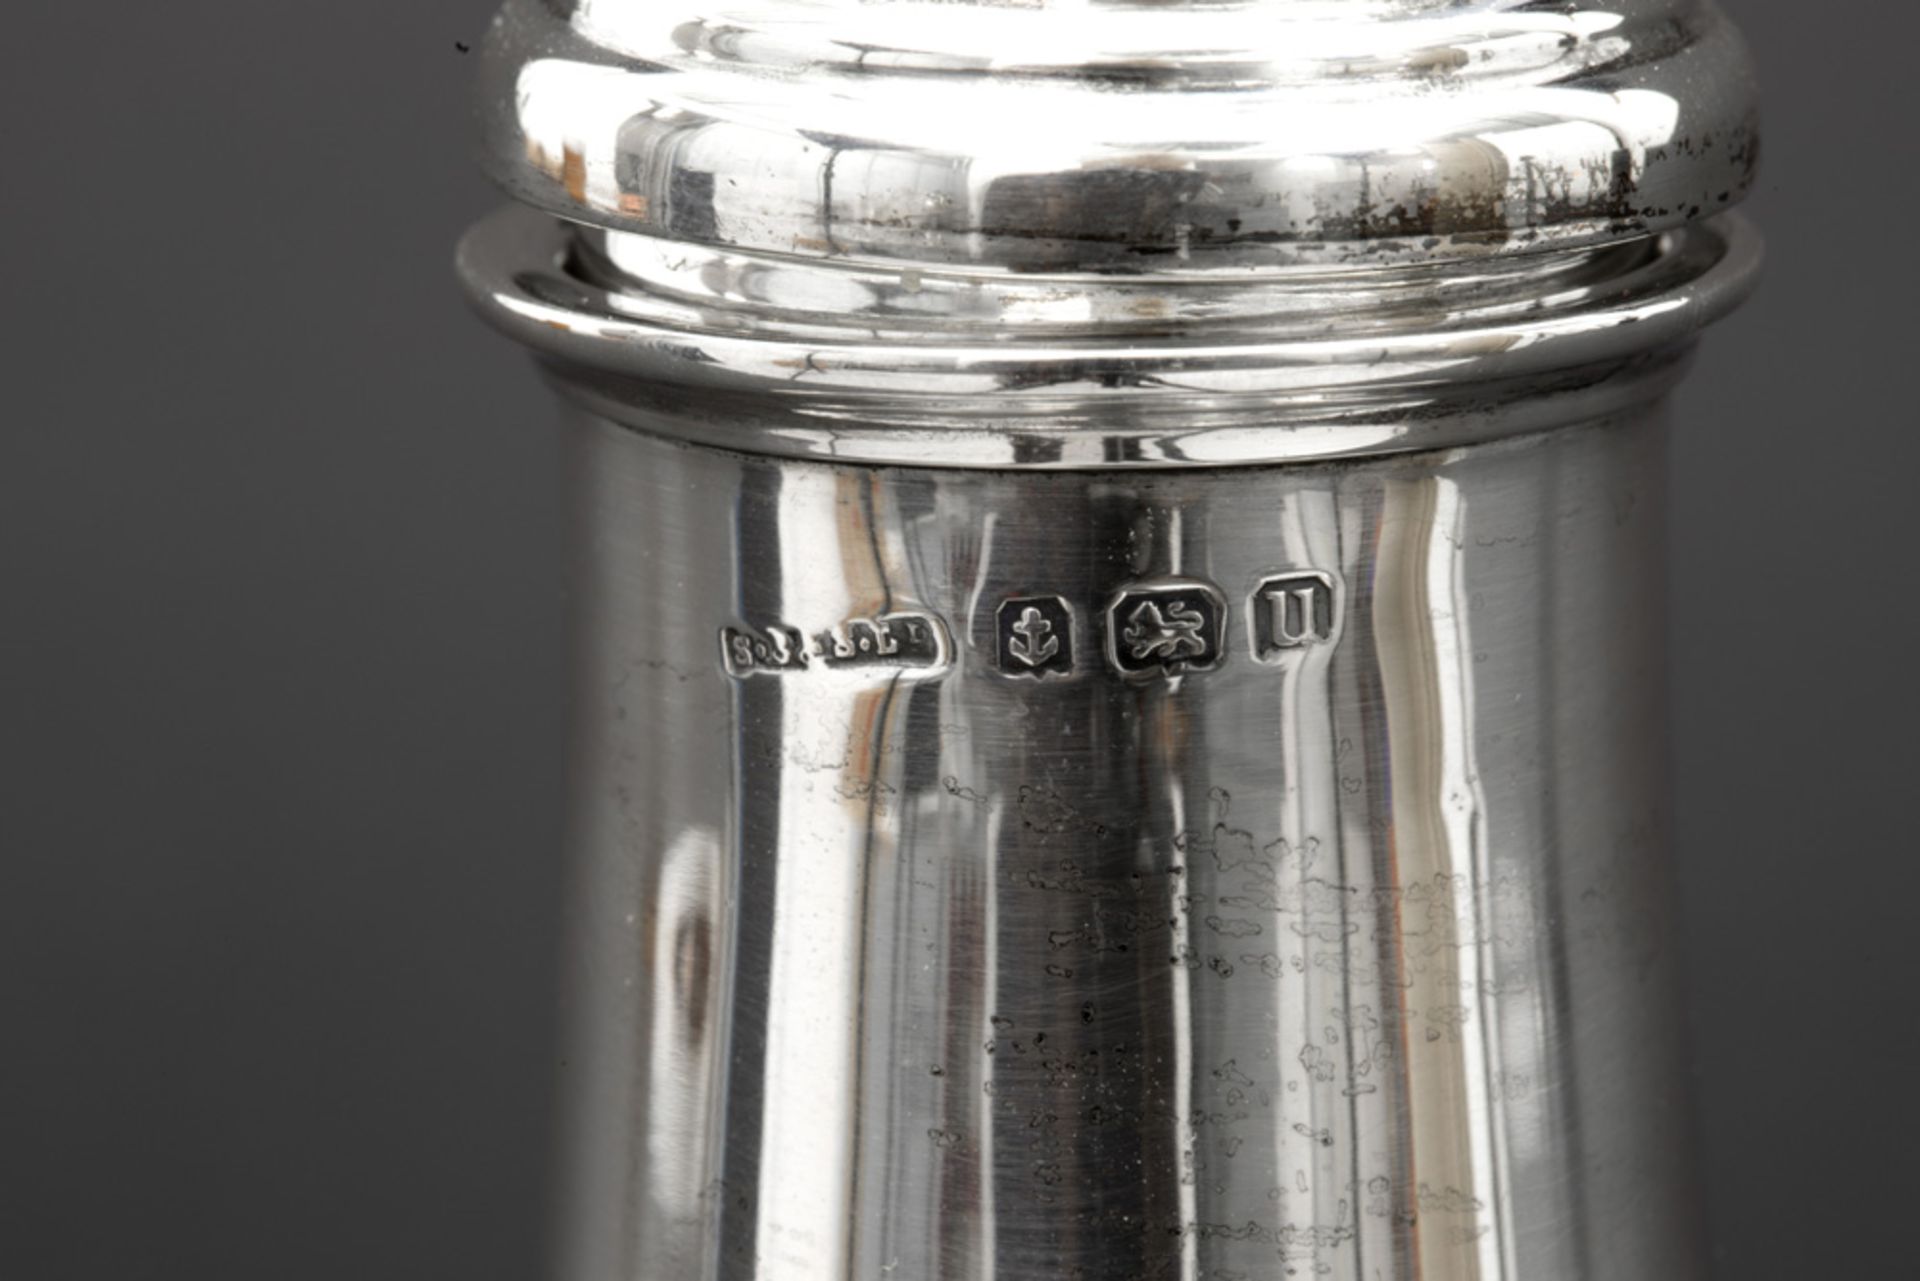 salt cellar and caster in marked and signed silver || Lot (2) massief zilver met een zoutvaatje en - Image 3 of 3